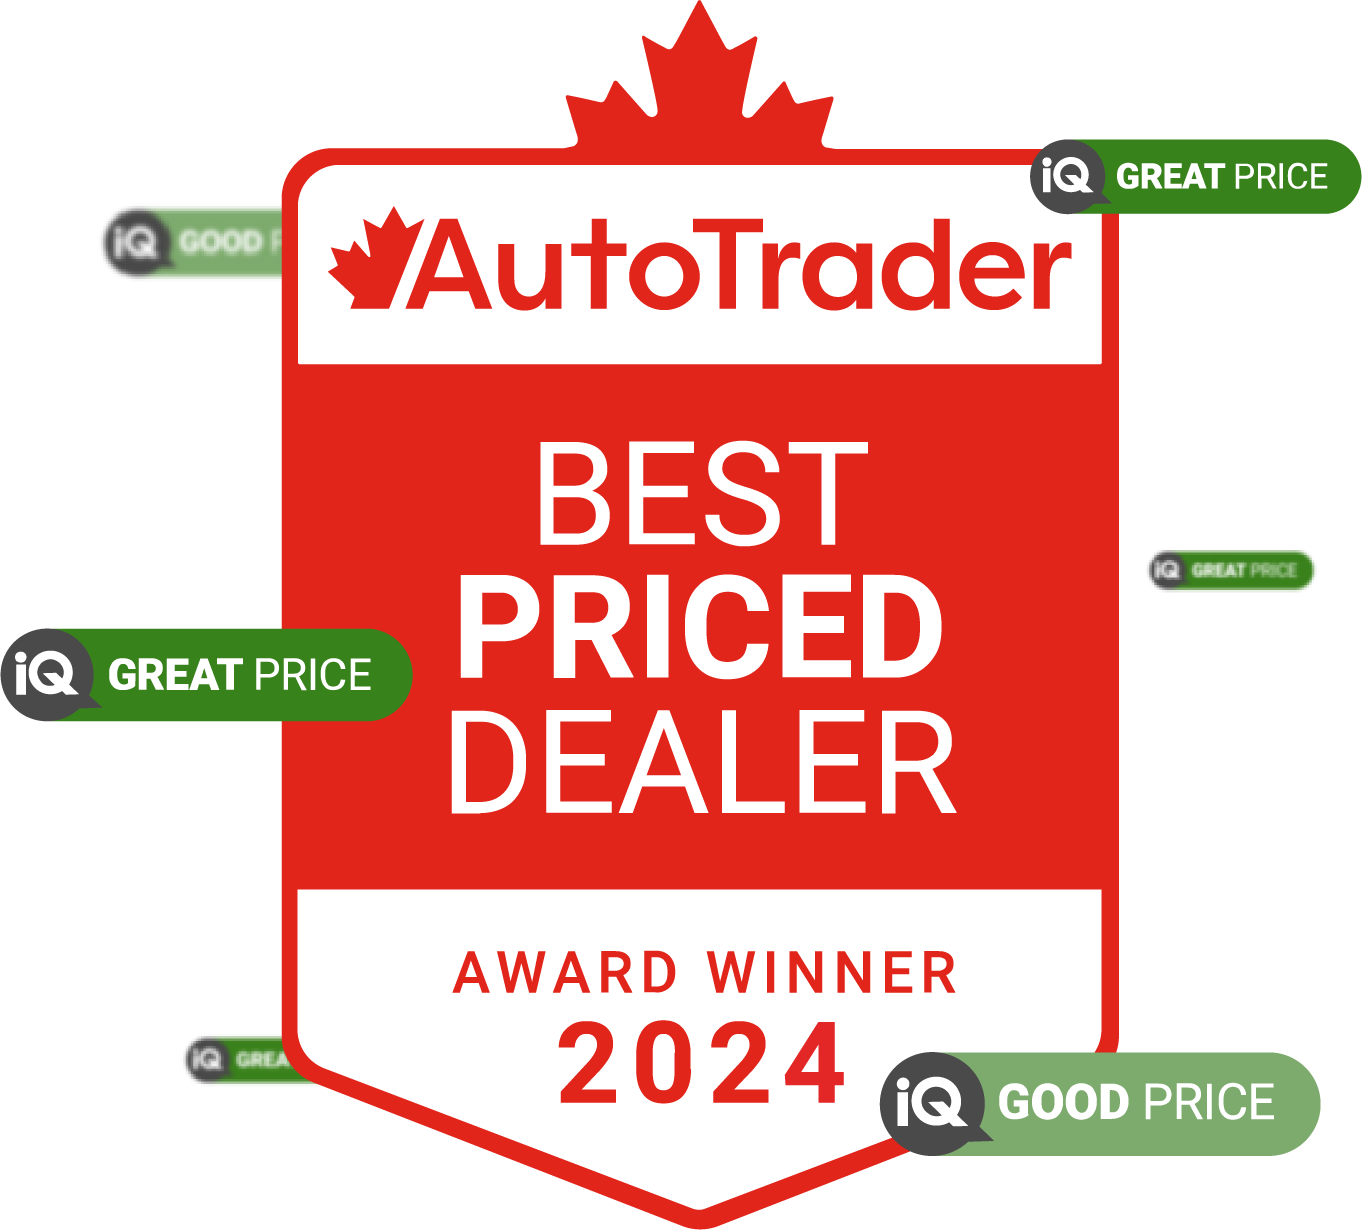 Canadian Automotive Retailers Recognized as 2024 AutoTrader Best Priced Dealer Announced